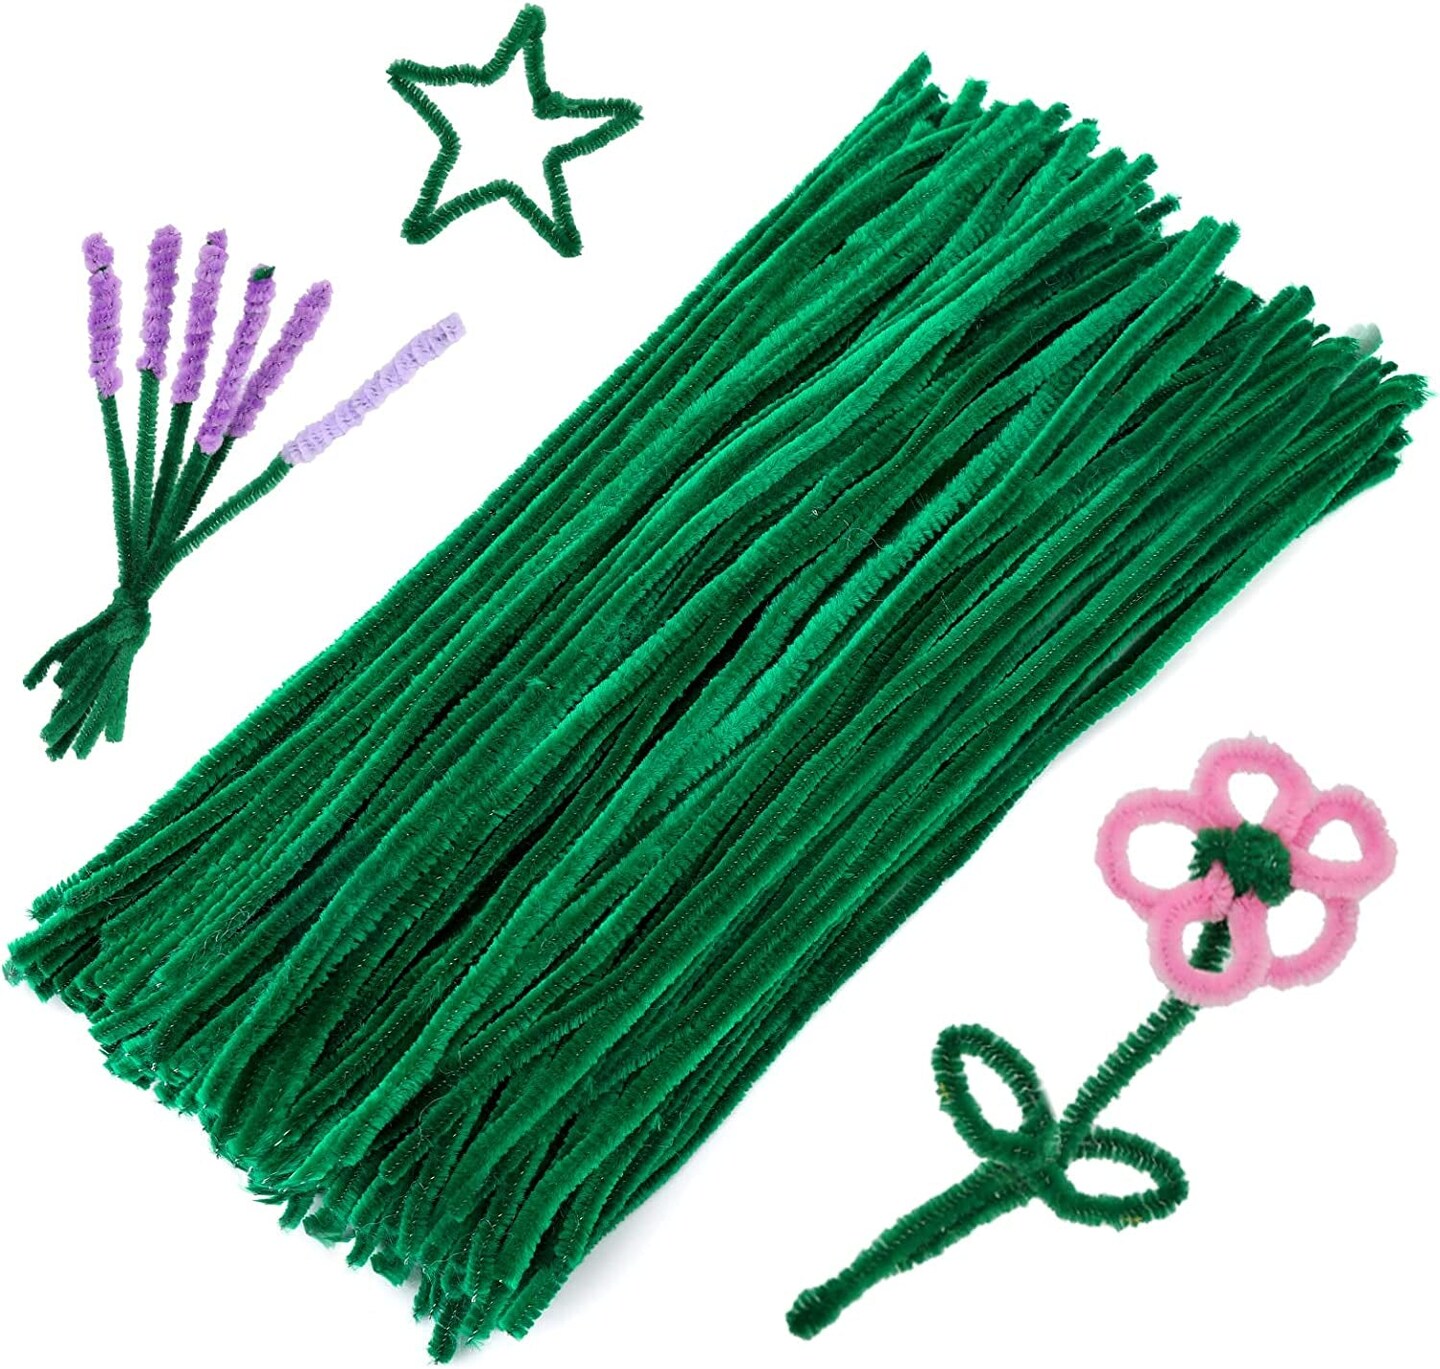 Pipecleaners/Chenile Stems - Crafting Supplies - Arts & Crafts - Education